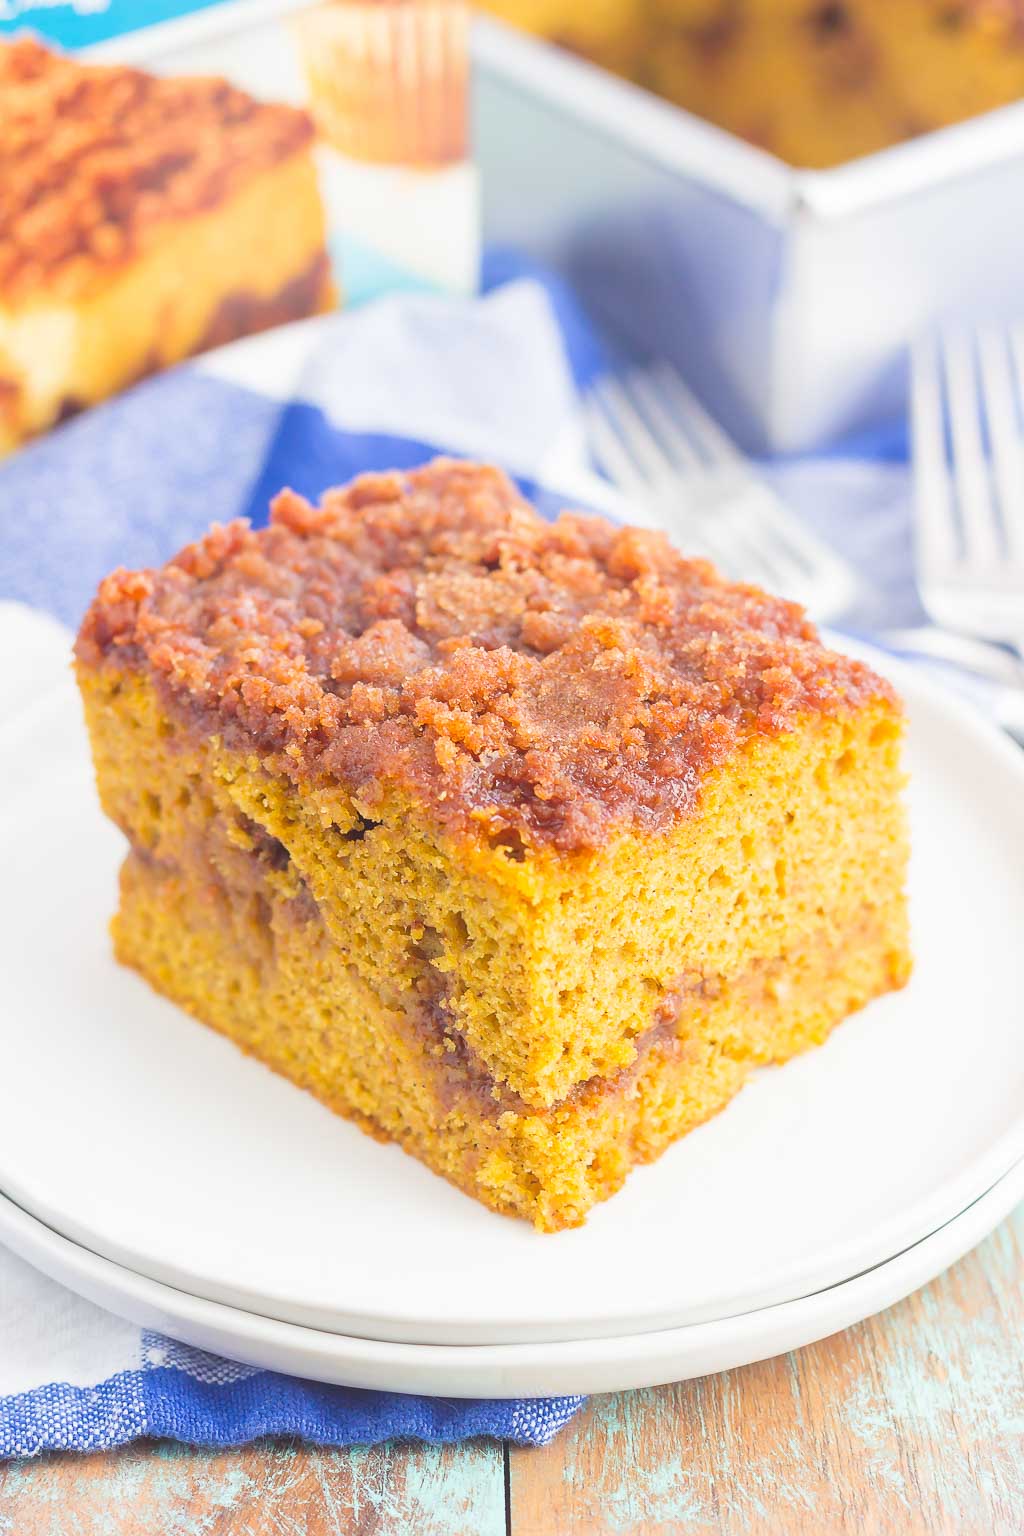 This Gluten Free Pumpkin Cinnamon Crumb Cake requires just a few ingredients and is ready in no time. Fluffy pumpkin cake is swirled with a sweet cinnamon streusel and then baked until golden. This easy cake is perfect to serve at all of your holiday gatherings!